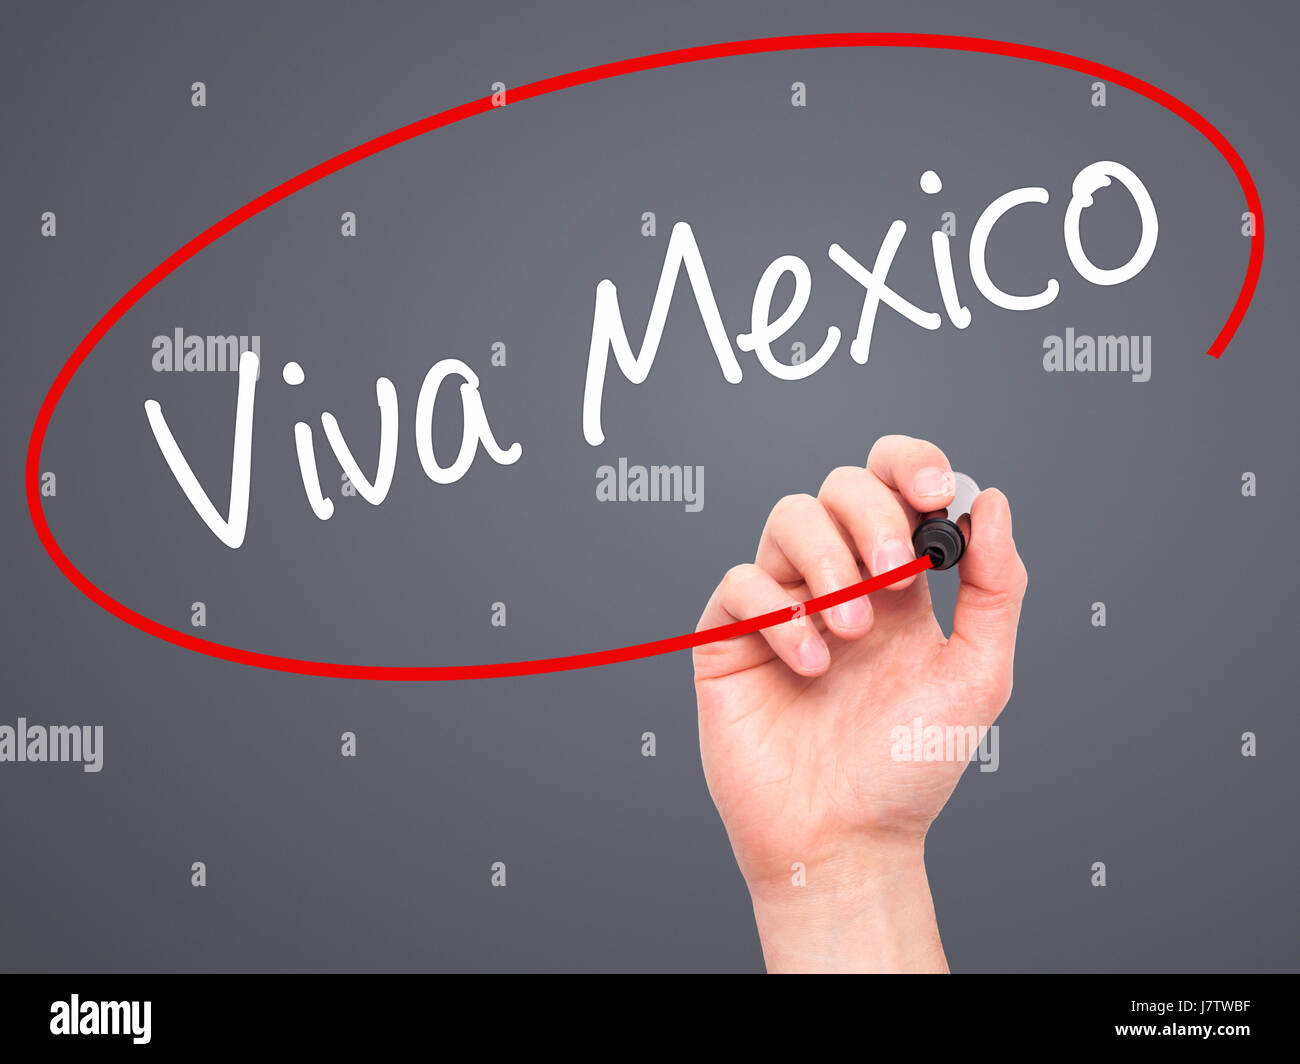 Man Hand writing Viva Mexico with black marker on visual screen. Isolated on grey. Business, technology, internet concept. Stock Photo Stock Photo